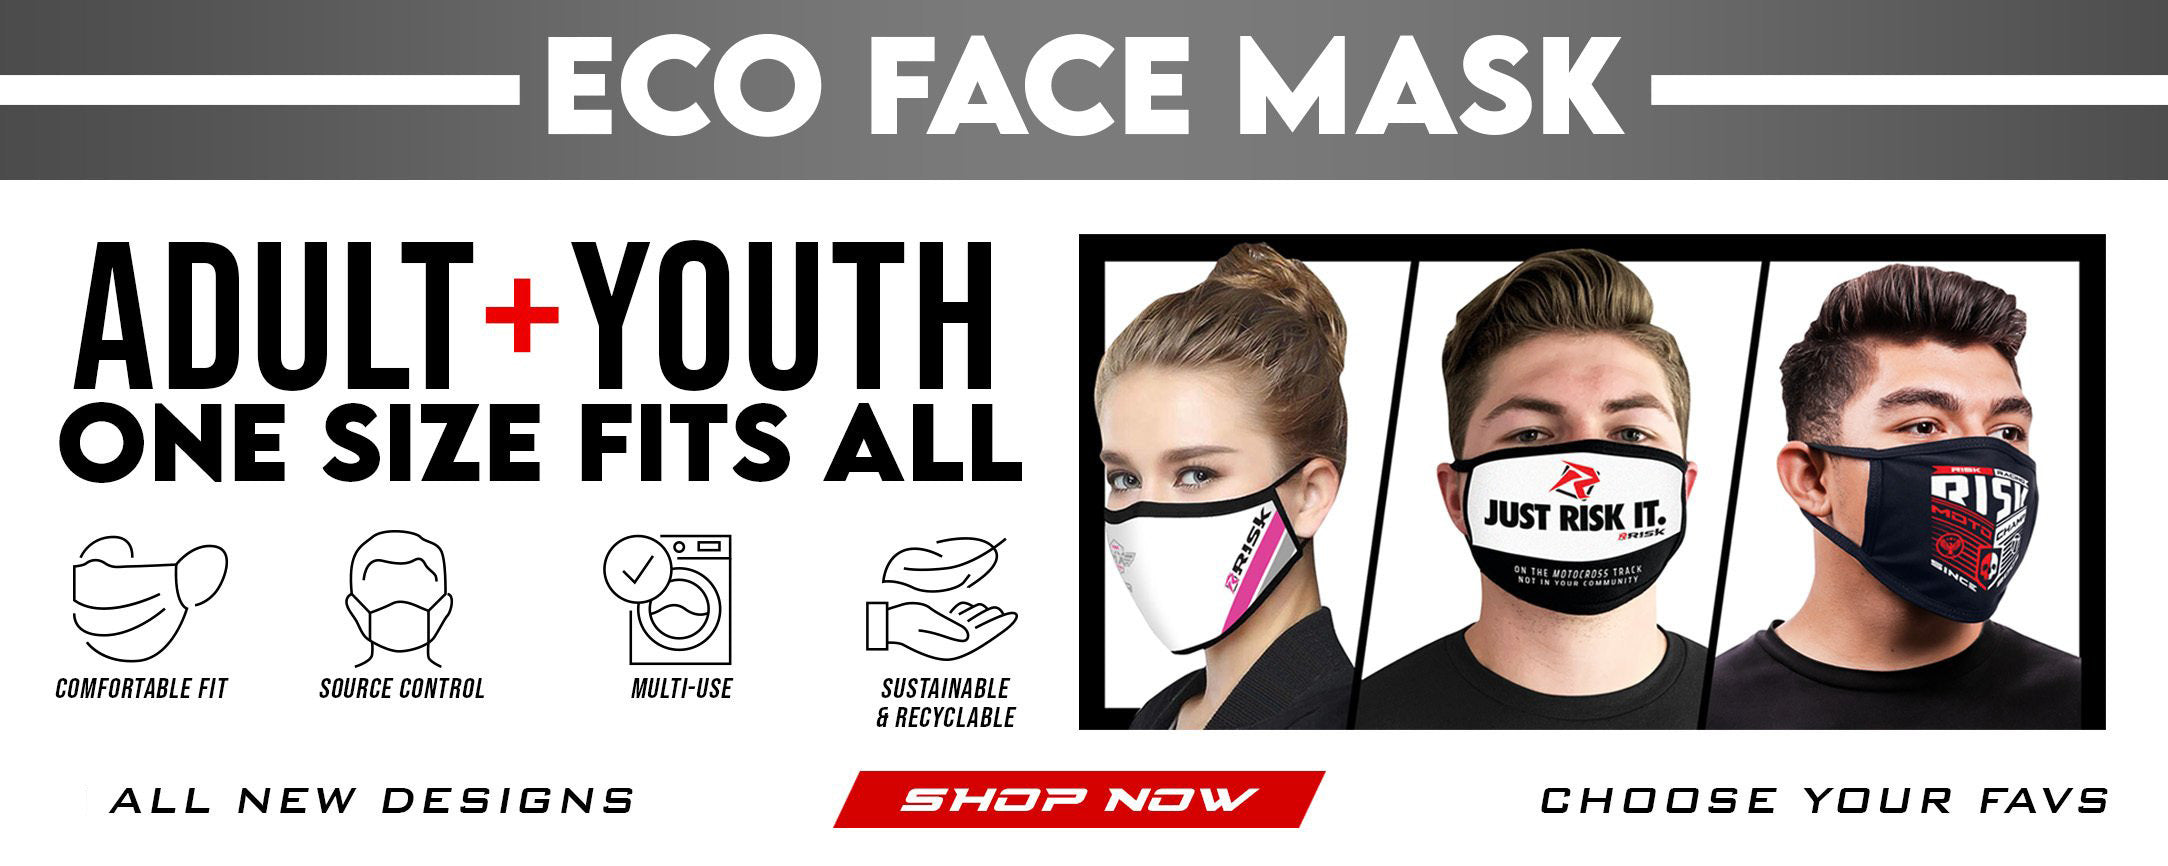 Reusable and washable cotton face masks/face covering by Risk Racing